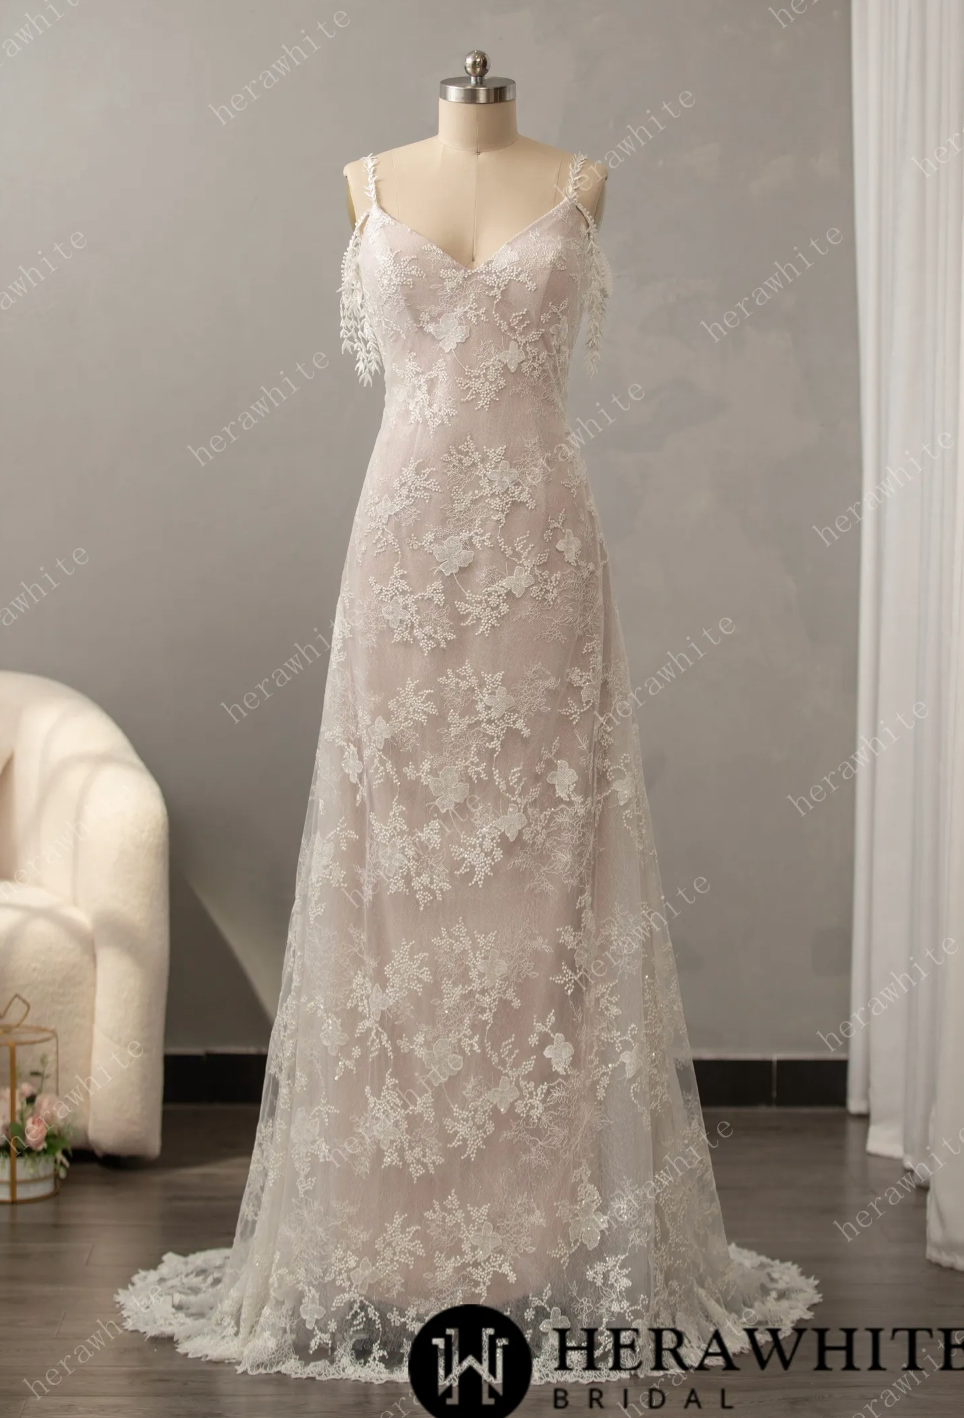 2021 Boho Lace Boho Lace Wedding Dress For Women Long Sleeve, Backless A  Line Bridal Gown With Marriage Dress Vestido De Noiva From Verycute, $84.03